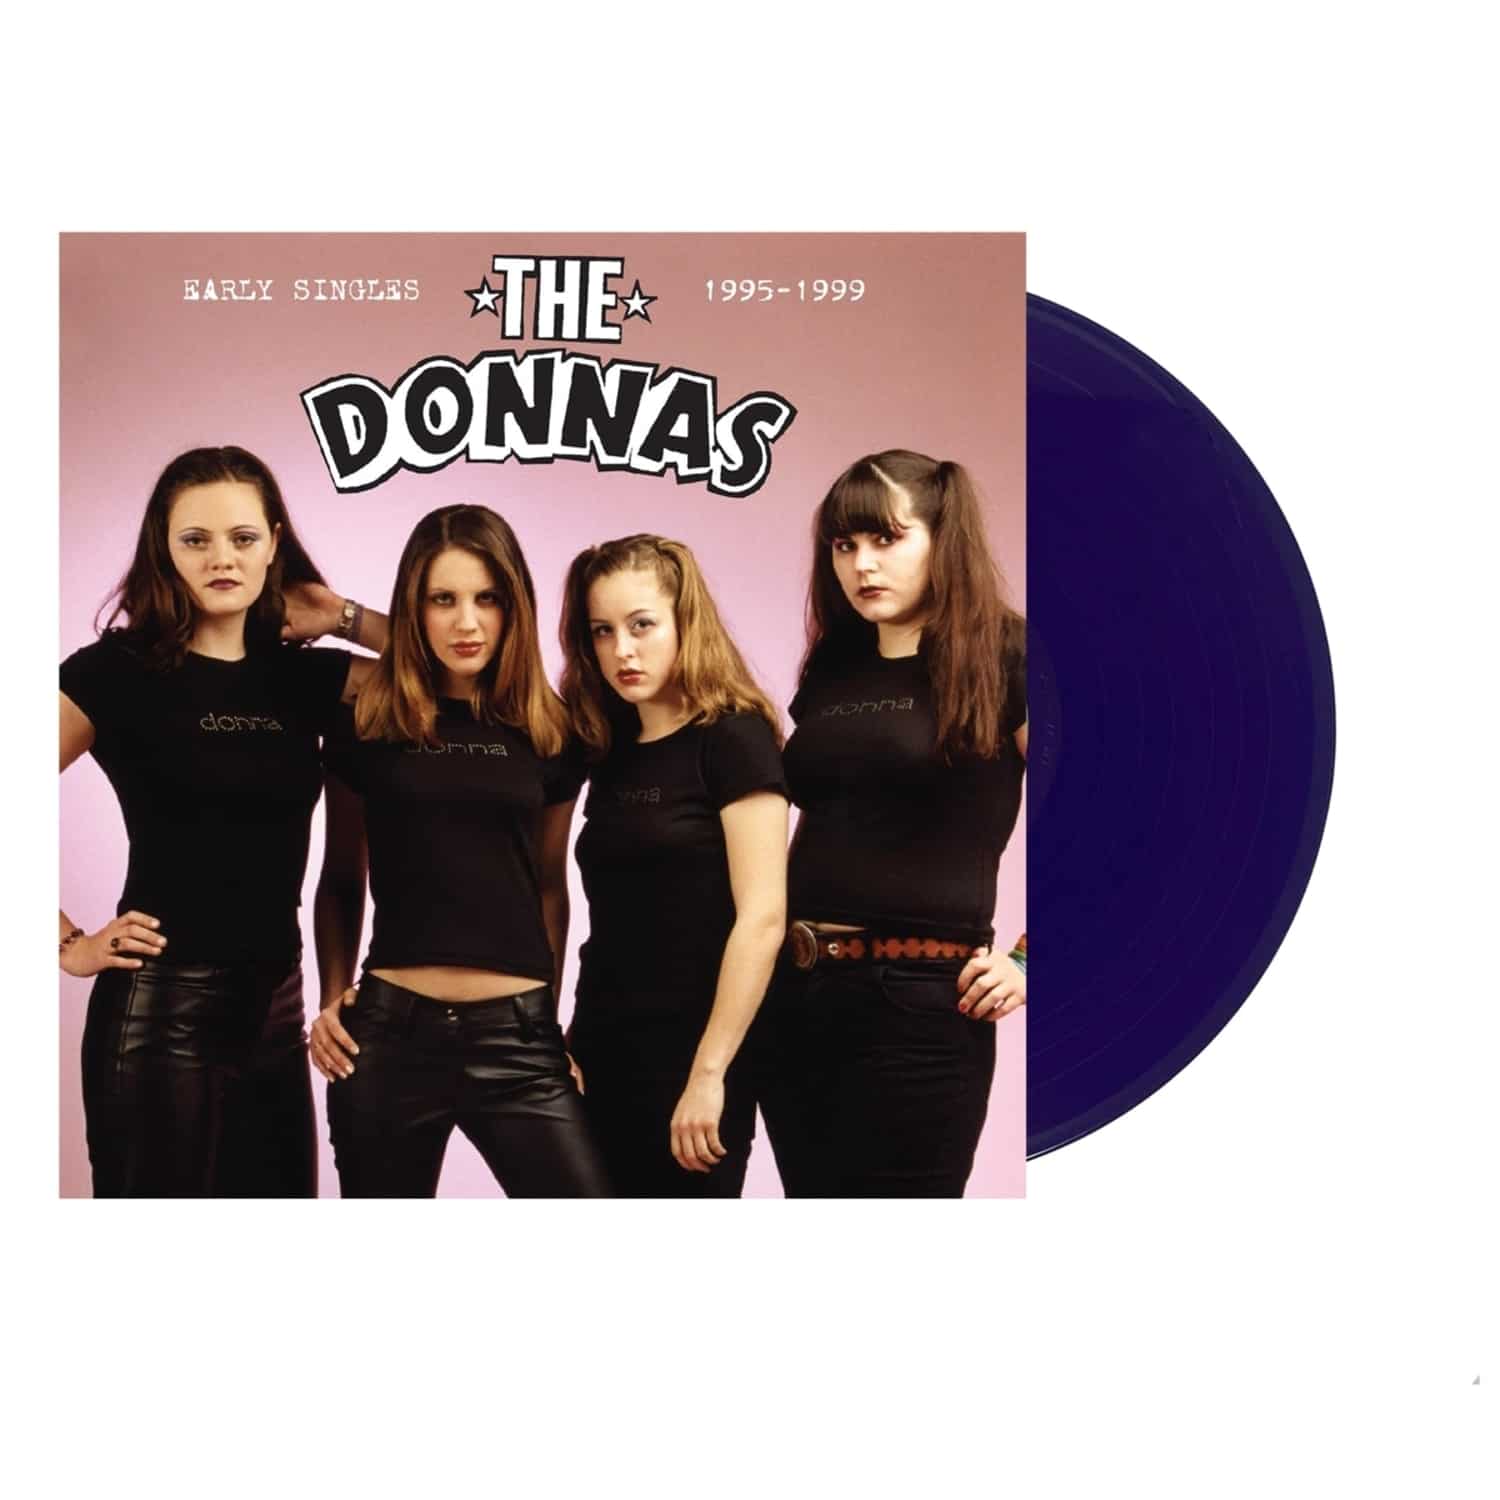 Donnas - EARLY SINGLES 1995-1999 